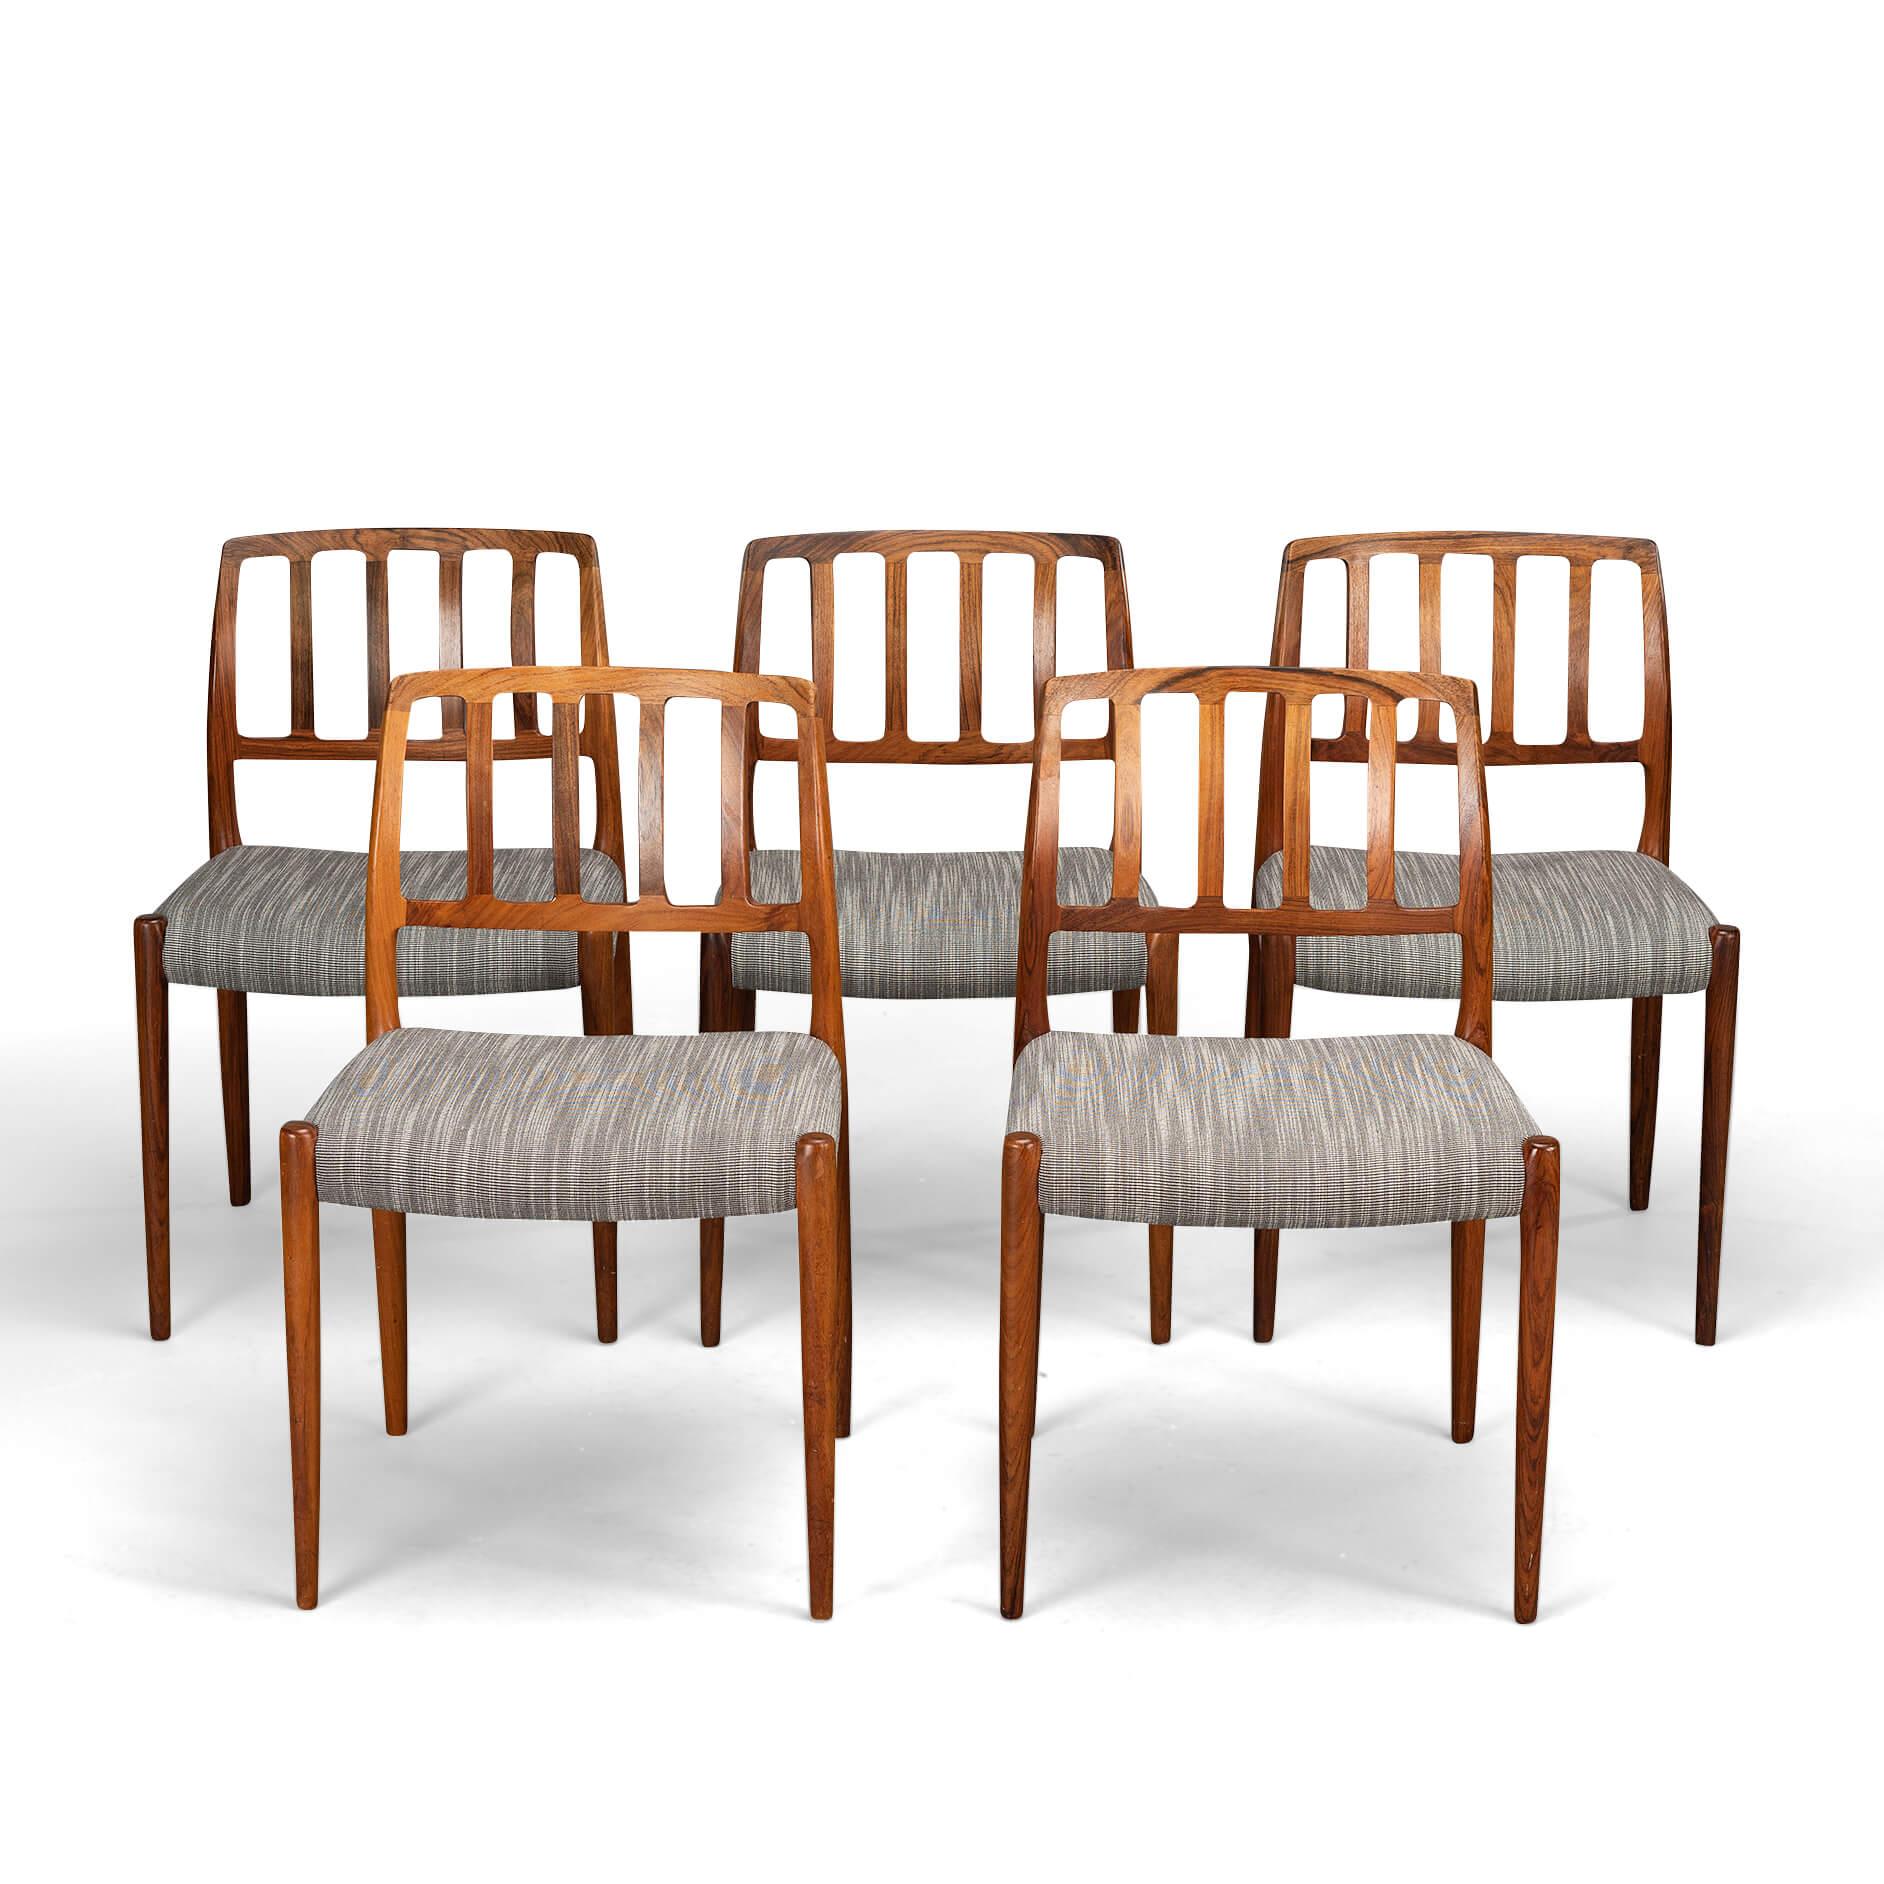 Dining chair : Model 83
Set off five rare Niels O. Møller rosewood dining Chairs Model 83. Made in Denmark in the 1960s. These beautifully shaped chairs are manufactured by J.L. Møller Mobelfabrik. They are made of solid rosewood and have a great